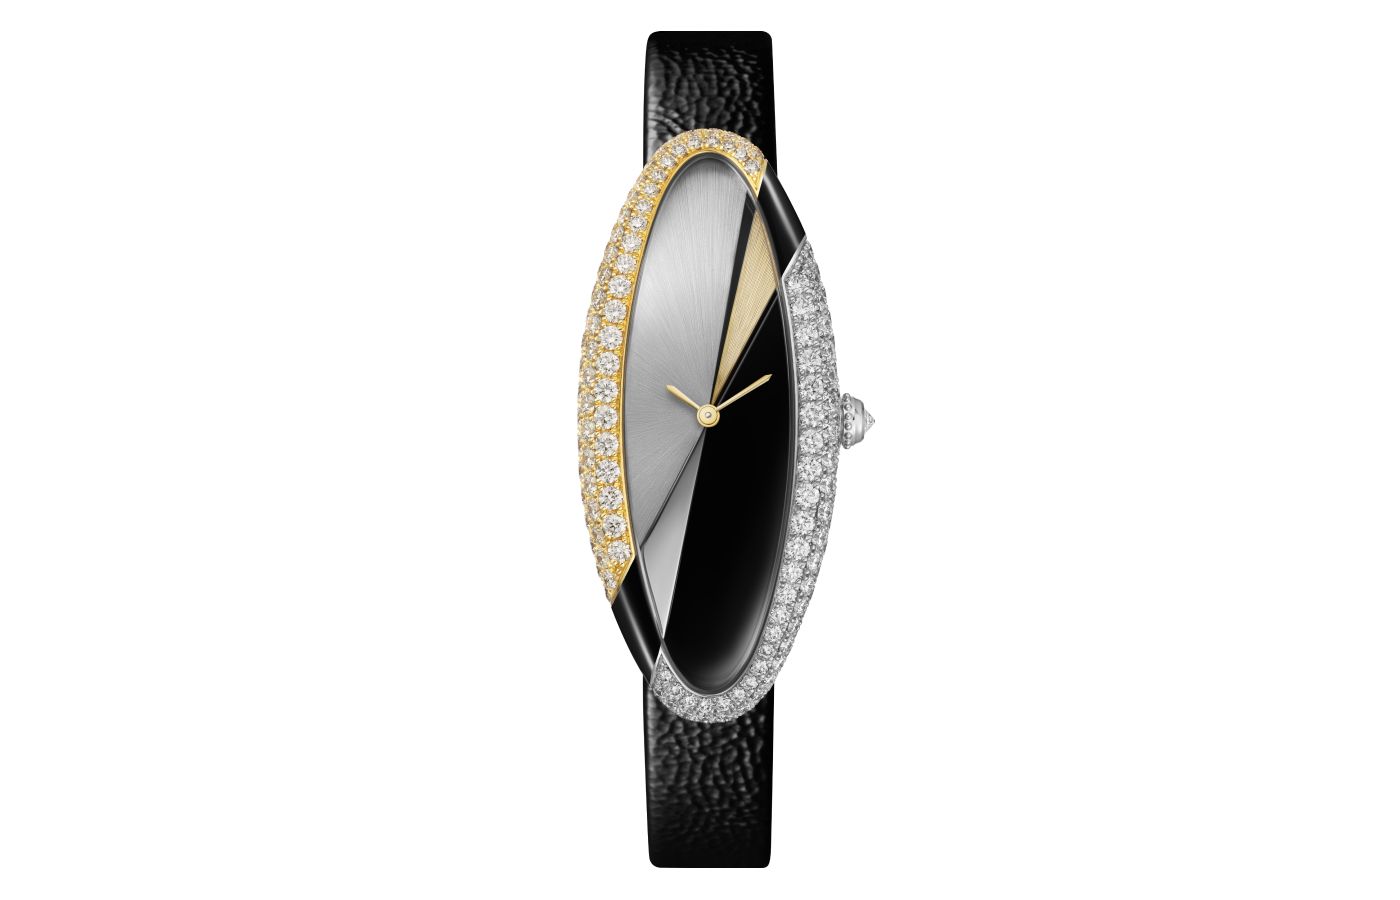 Cartier Métiers d’Art Baignoire Allongée watch in white gold, gold, polished and sunray-brushed white gold, sunray-brushed yellow gold , black lacquer, enamel  and diamond  